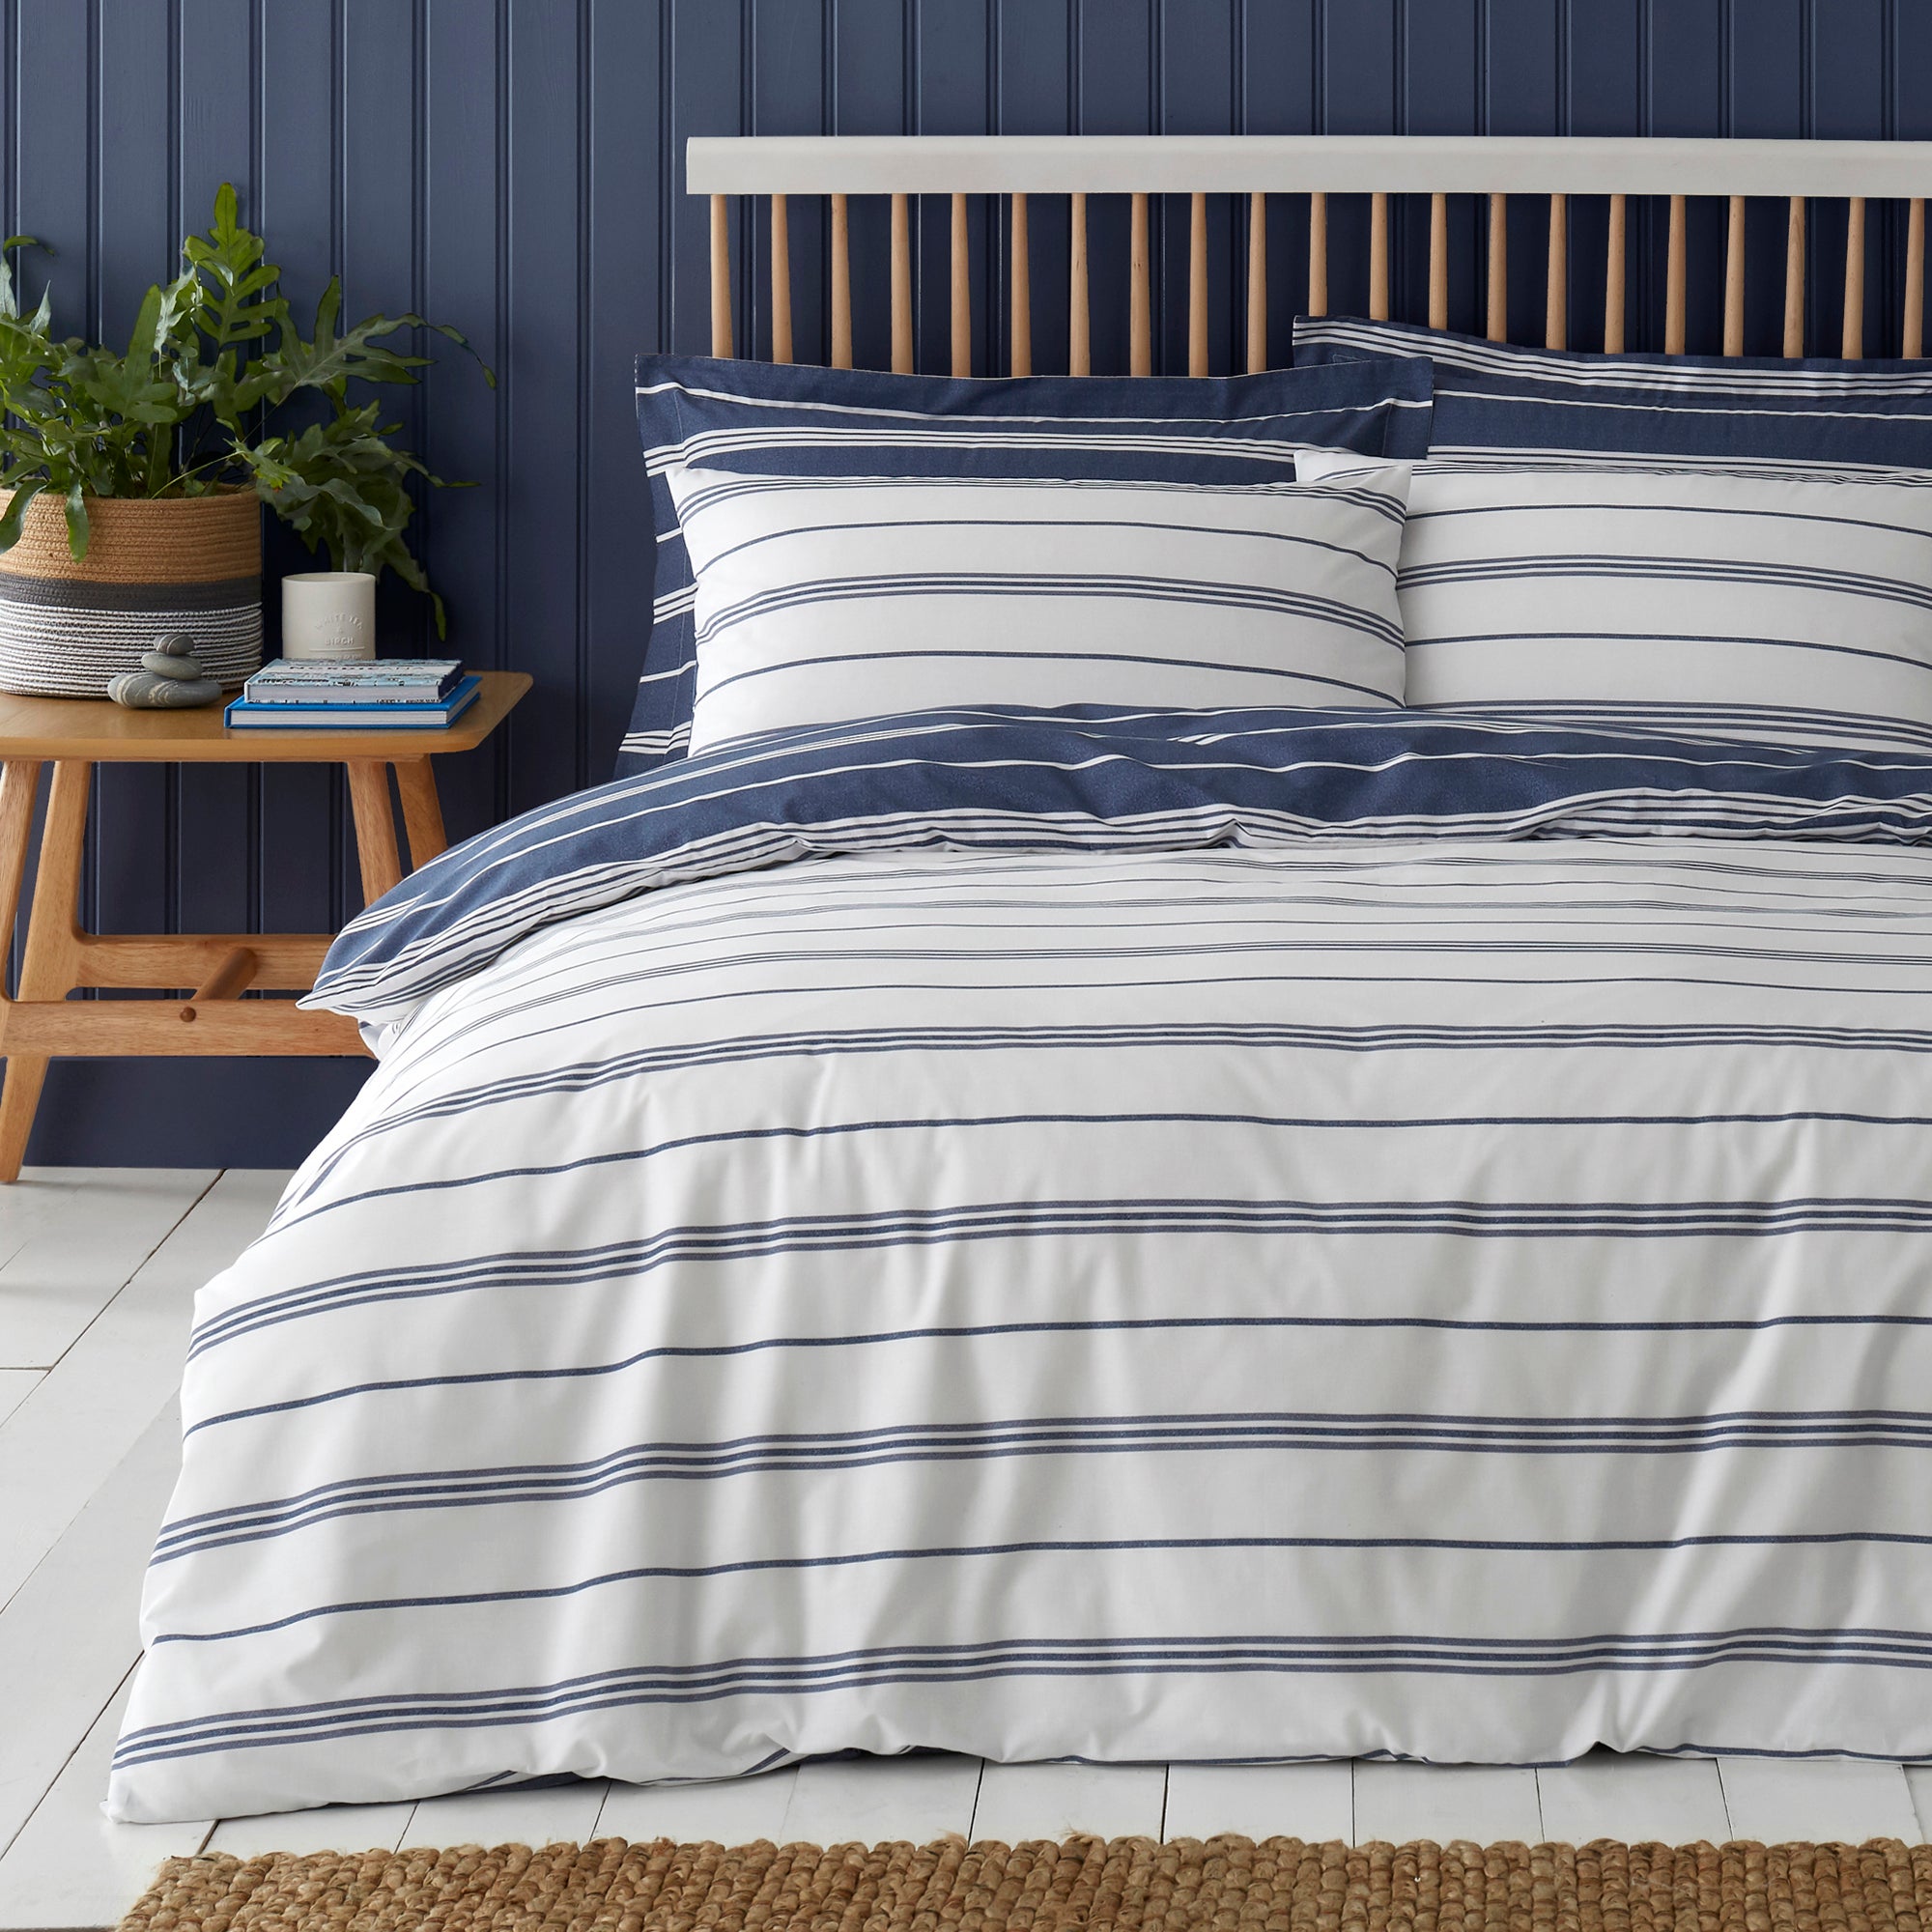 Falmouth Navy Striped Reversible Duvet Cover And Pillowcase Set Navy Blue And White